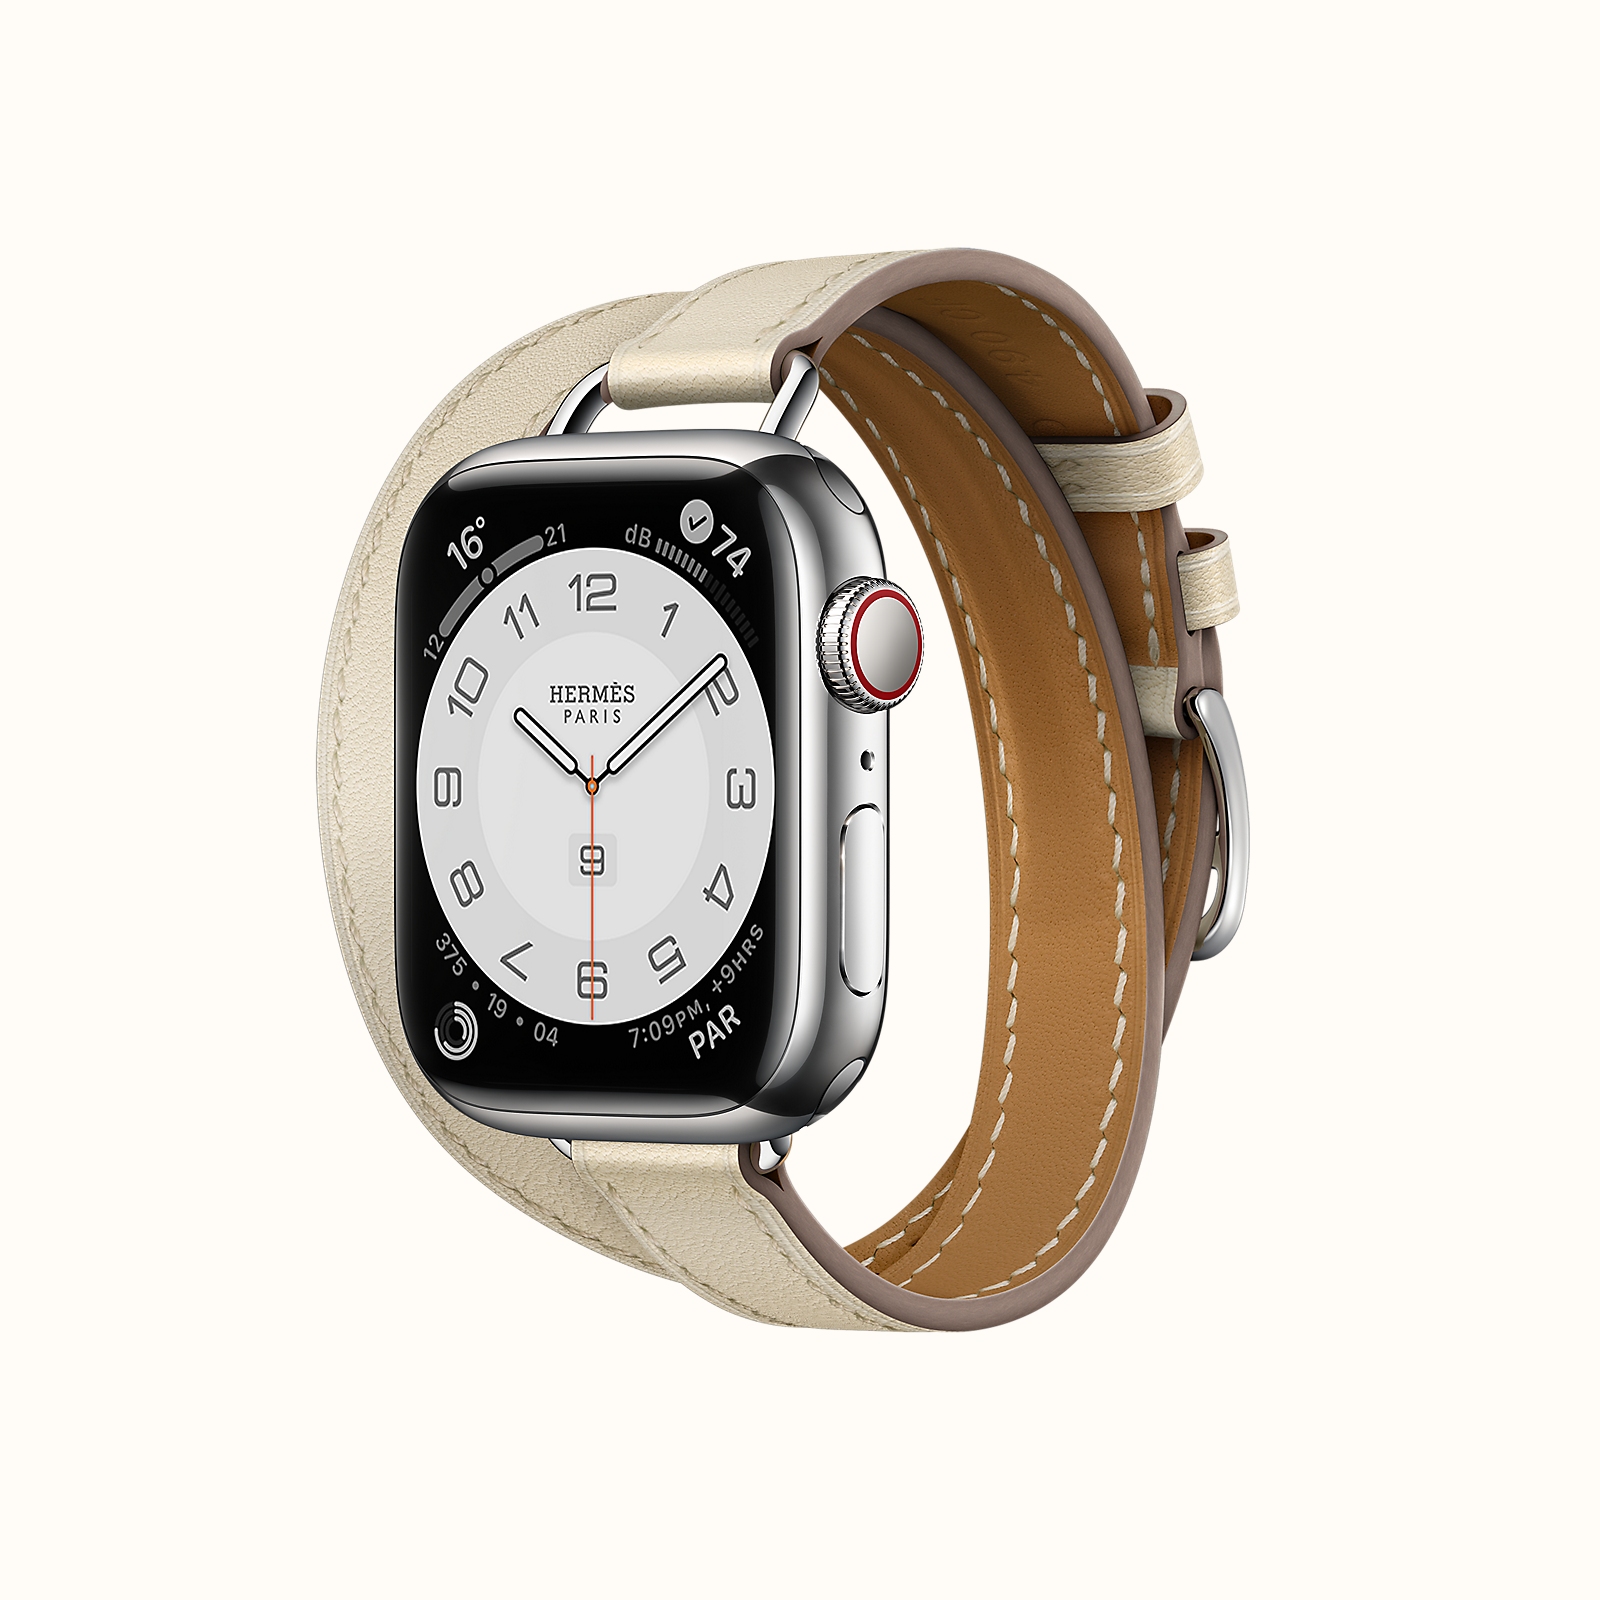 HERMÈS PARIS APPLE WATCH FACE 4K – Best of Wallpapers for Andriod and ios | Apple  watch custom faces, Apple watch faces, Apple watch clock faces